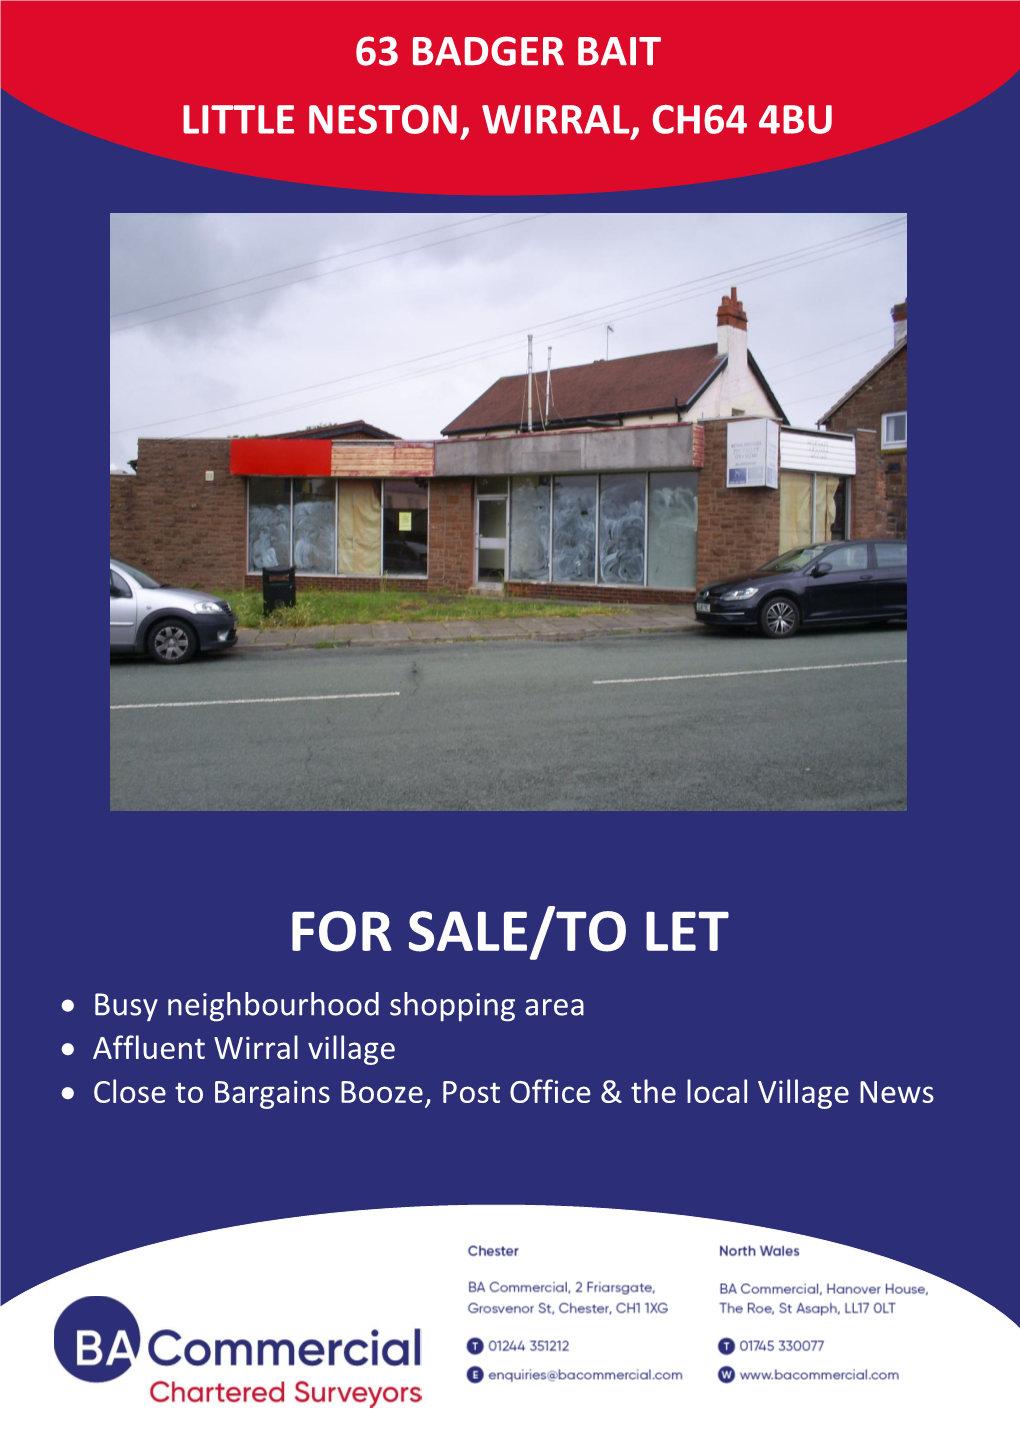 FOR SALE/TO LET • Busy Neighbourhood Shopping Area • Affluent Wirral Village • Close to Bargains Booze, Post Office & the Local Village News